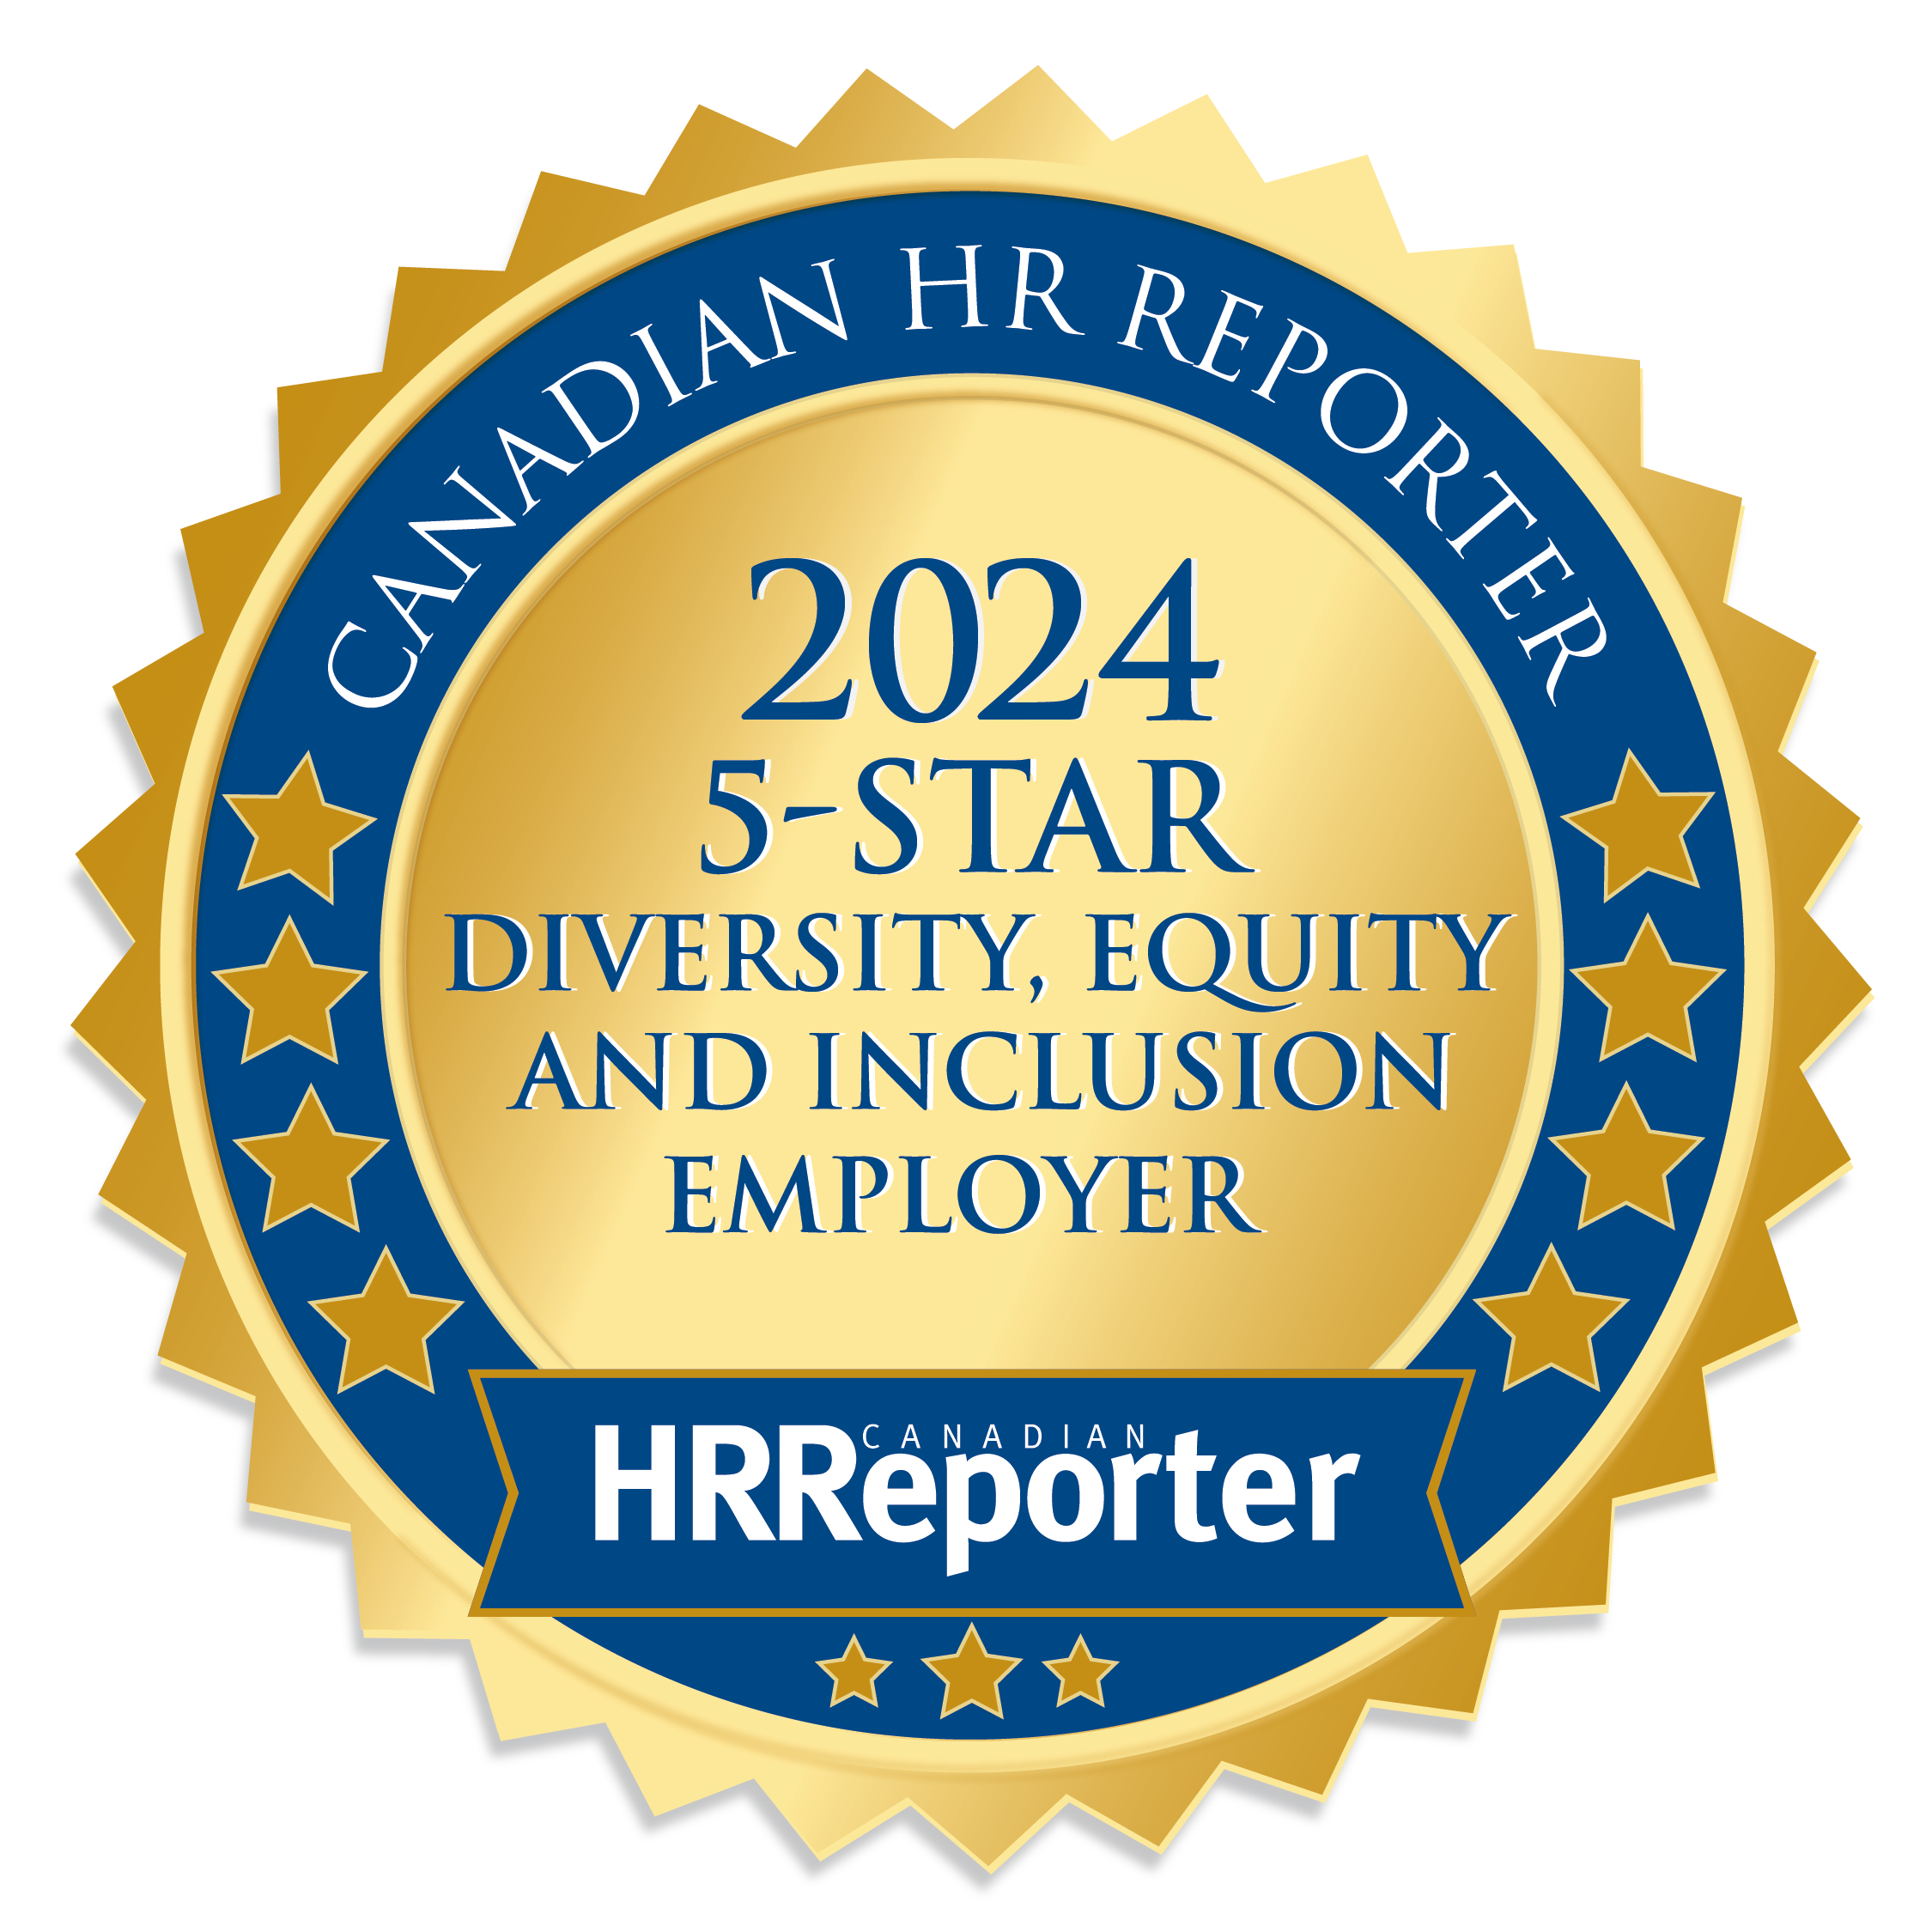 2024 5-STAR DIVERSITY, EQUITY AND INCLUSION EMPLOYER CANADIAN HRReporter